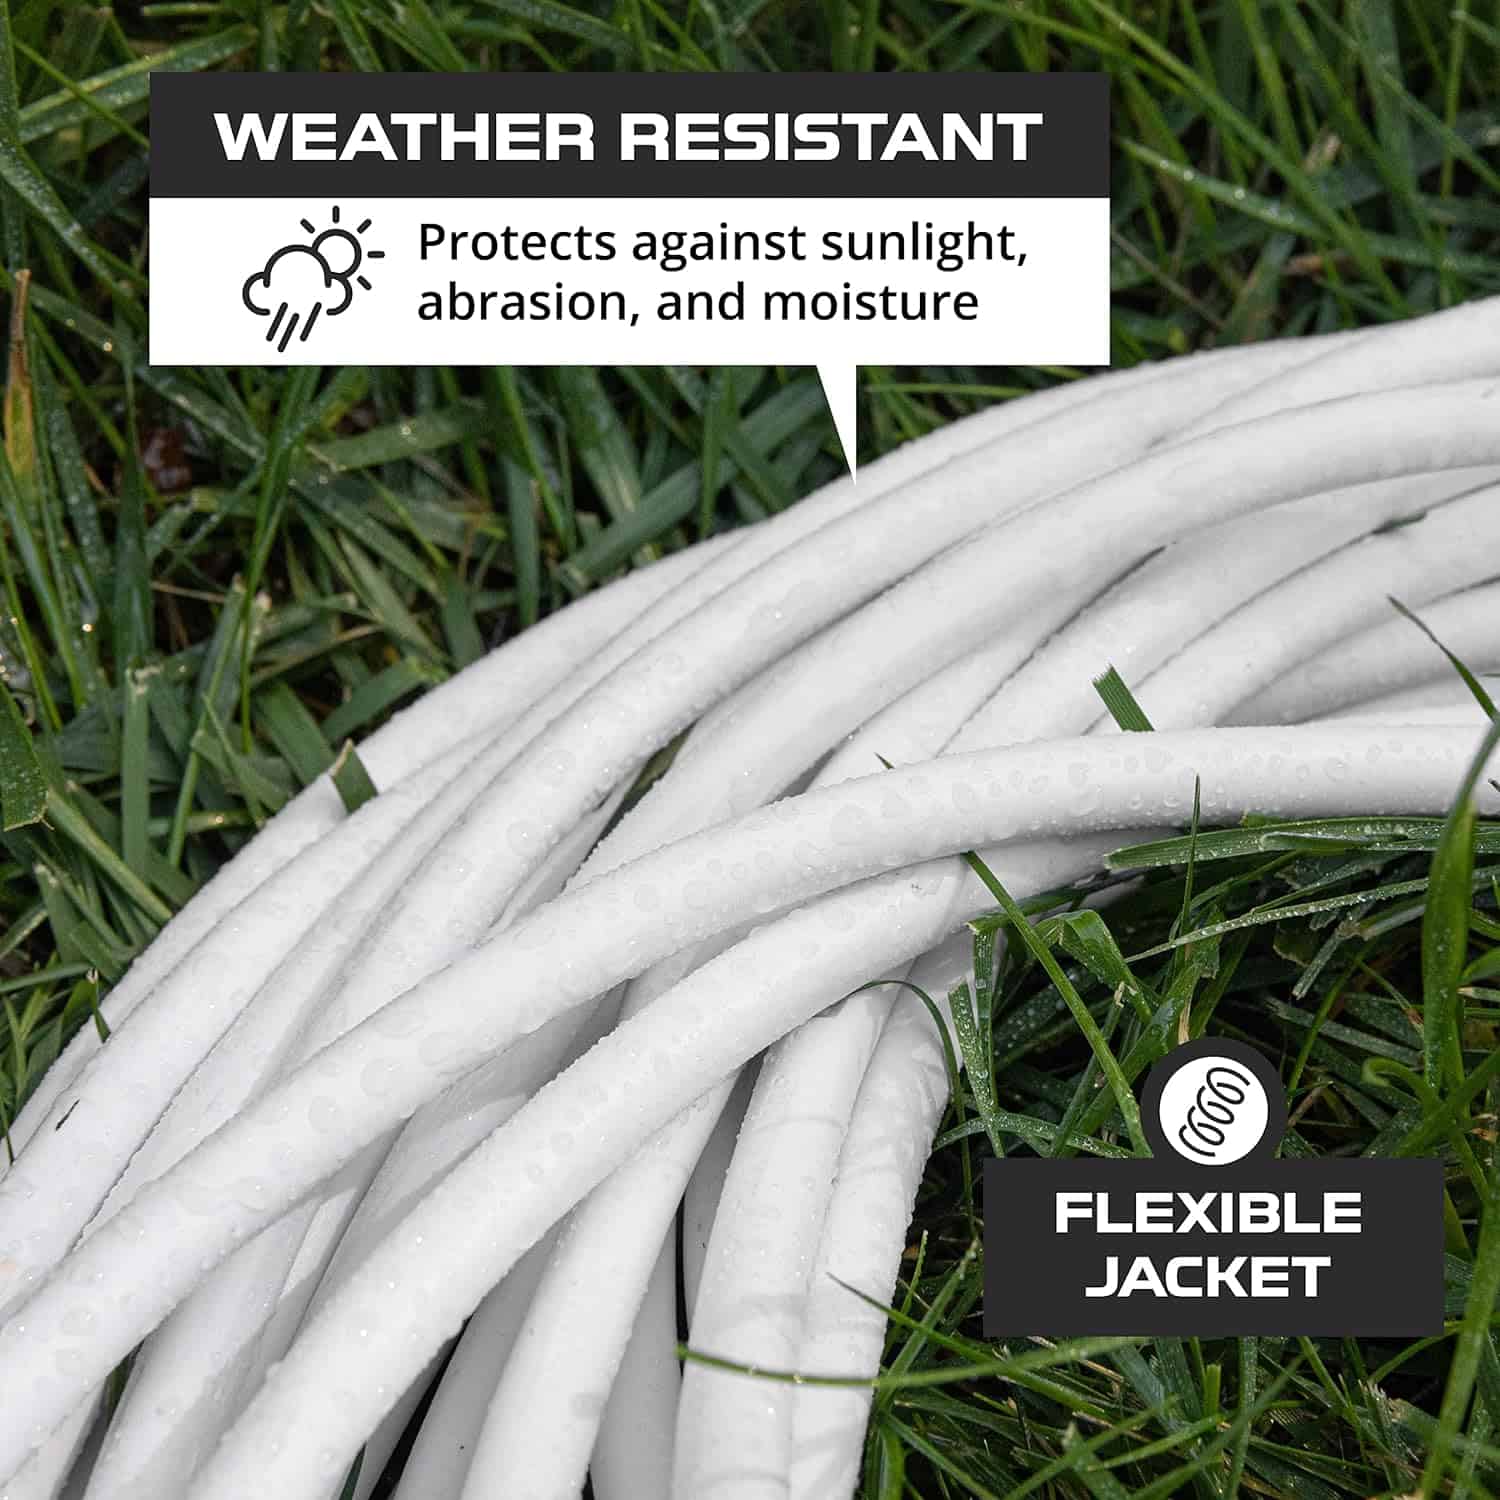 15 Ft White Extension Cord – 16 3 SJTW Durable Electrical Cable 3